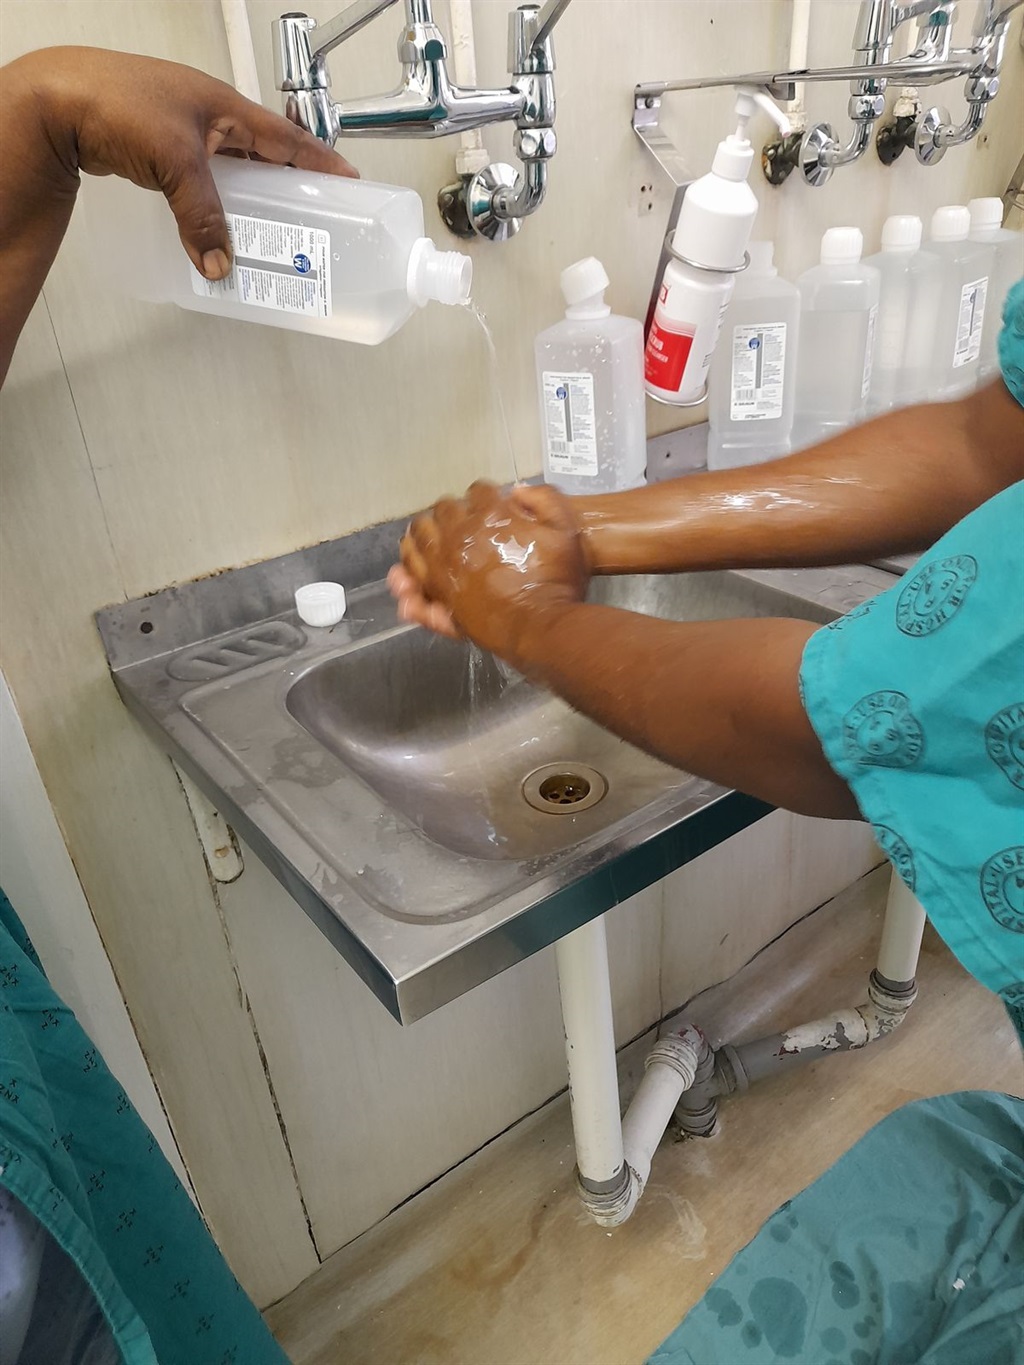 For 5 years, a KZN hospital has struggled for water. Now a union